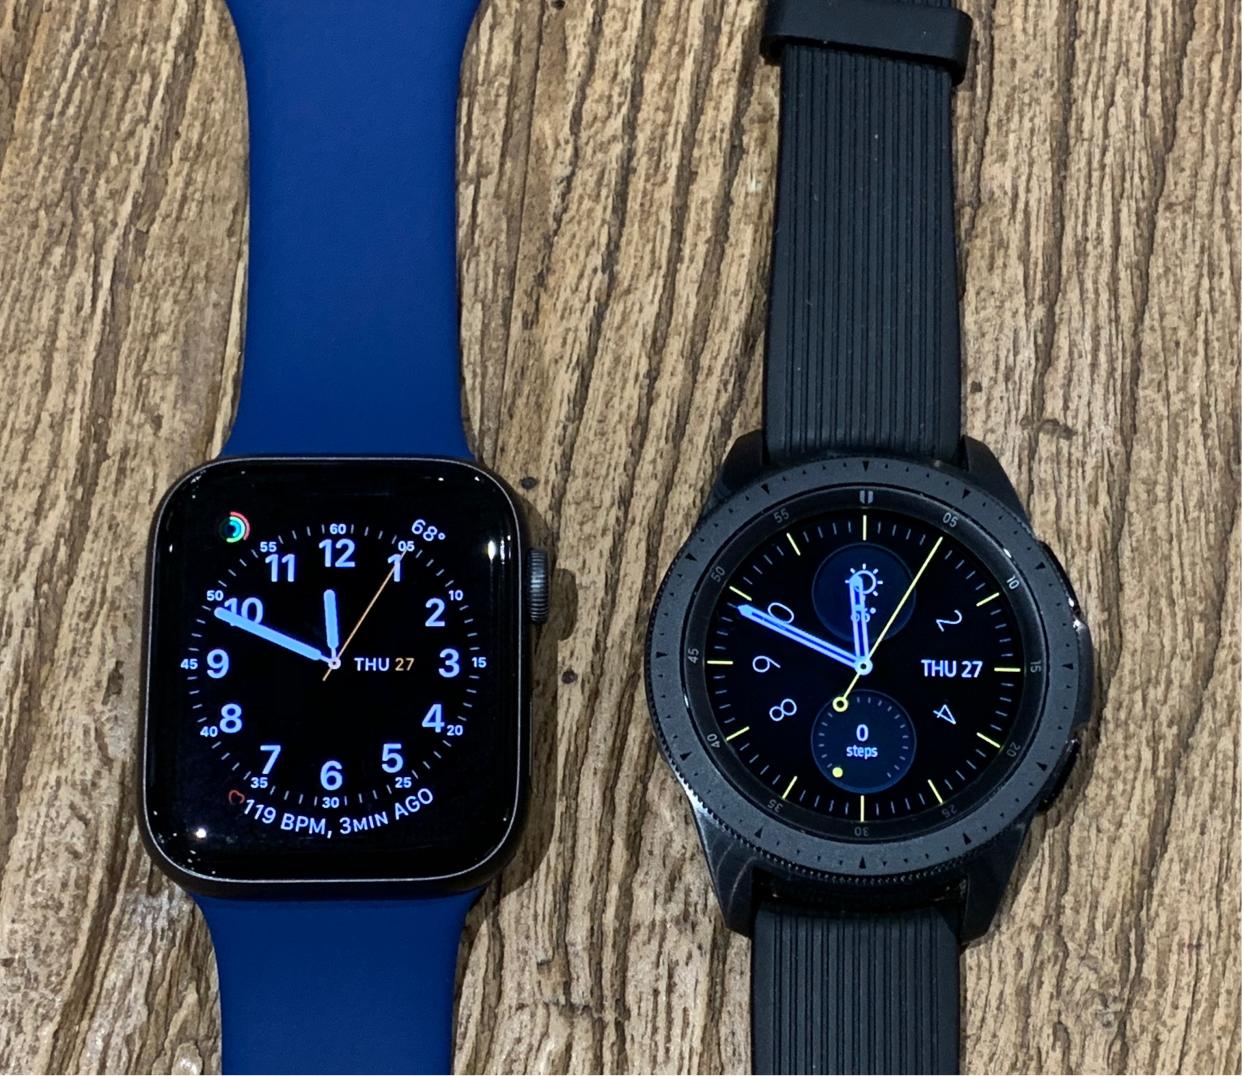 The Galaxy Watch next to the Apple Watch Series 4.